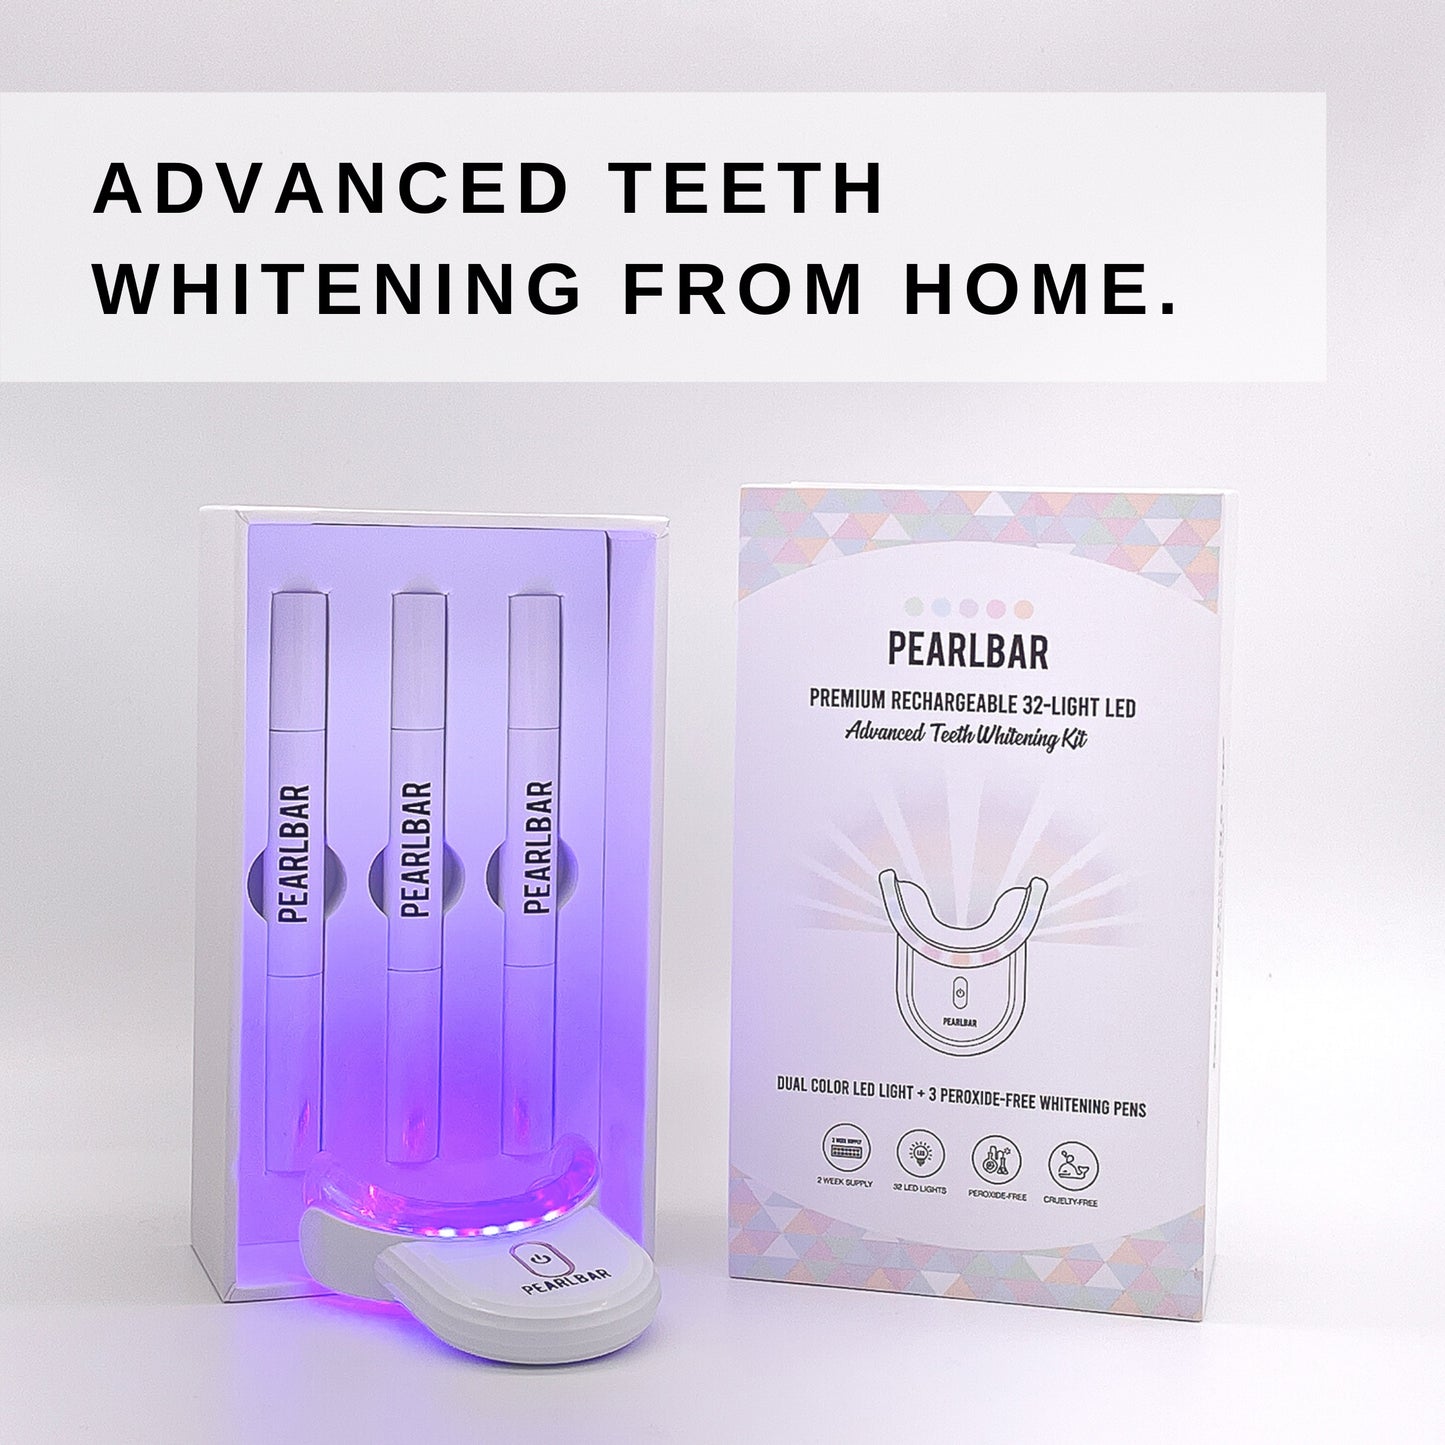 PearlBar Premium LED At-Home Teeth Whitening kit for advanced teeth whitening results from home